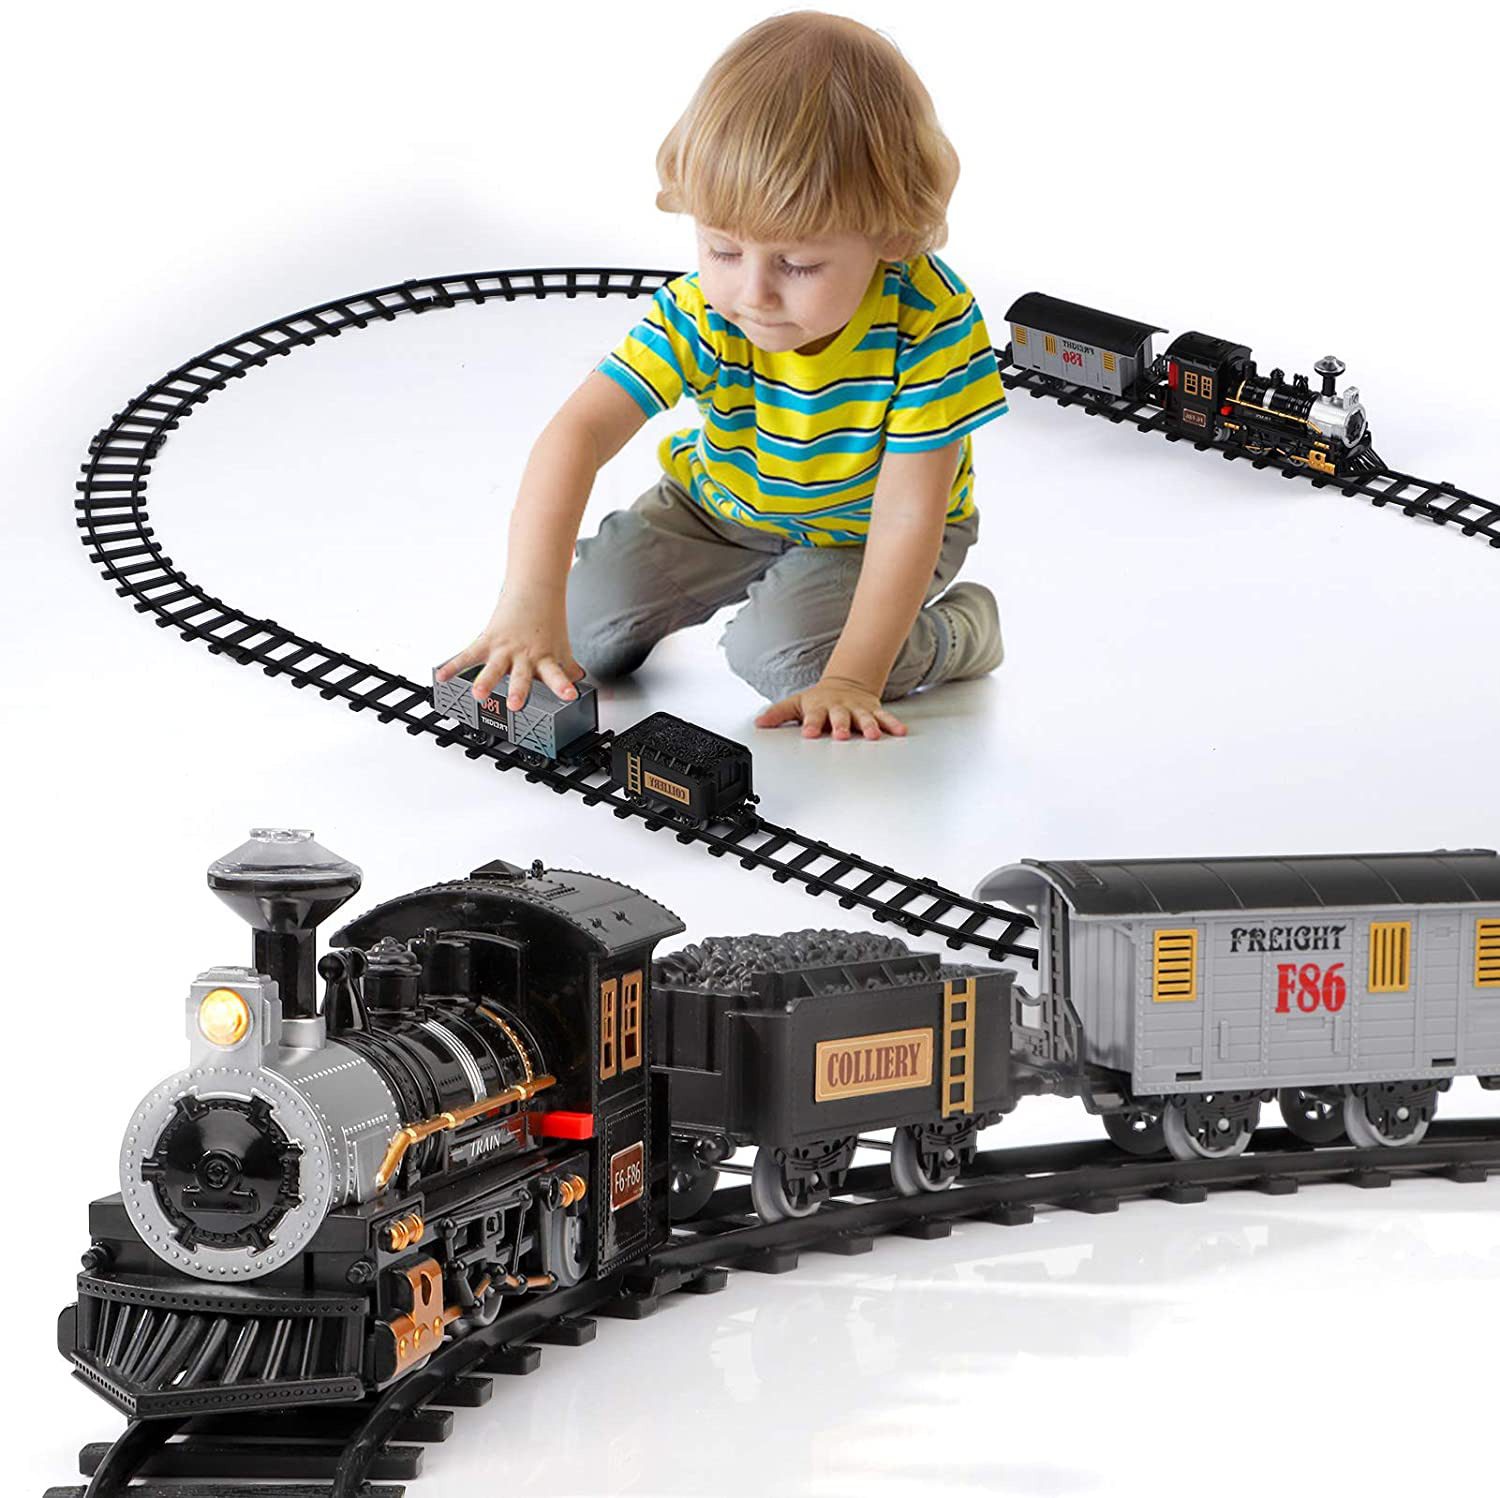 Electric Train Set For Kids, Battery-powered Train Toys With Sounds New